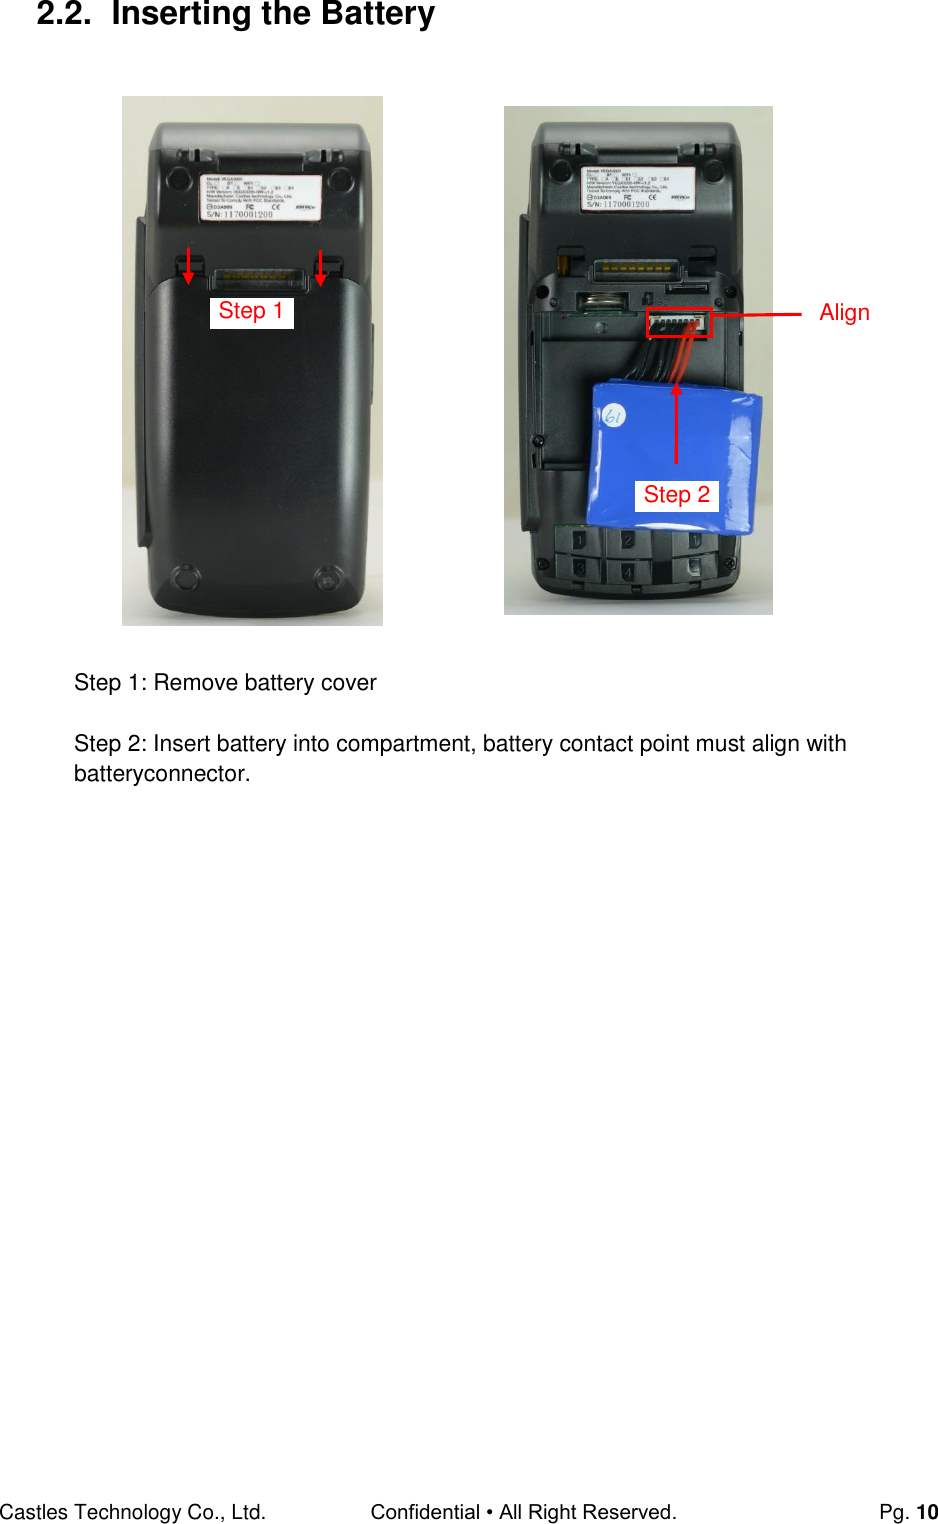 Castles Technology Co., Ltd. Confidential • All Right Reserved.  Pg. 10 2.2.  Inserting the Battery                       Step 1: Remove battery cover  Step 2: Insert battery into compartment, battery contact point must align with batteryconnector.    Align Step 2 Step 1 